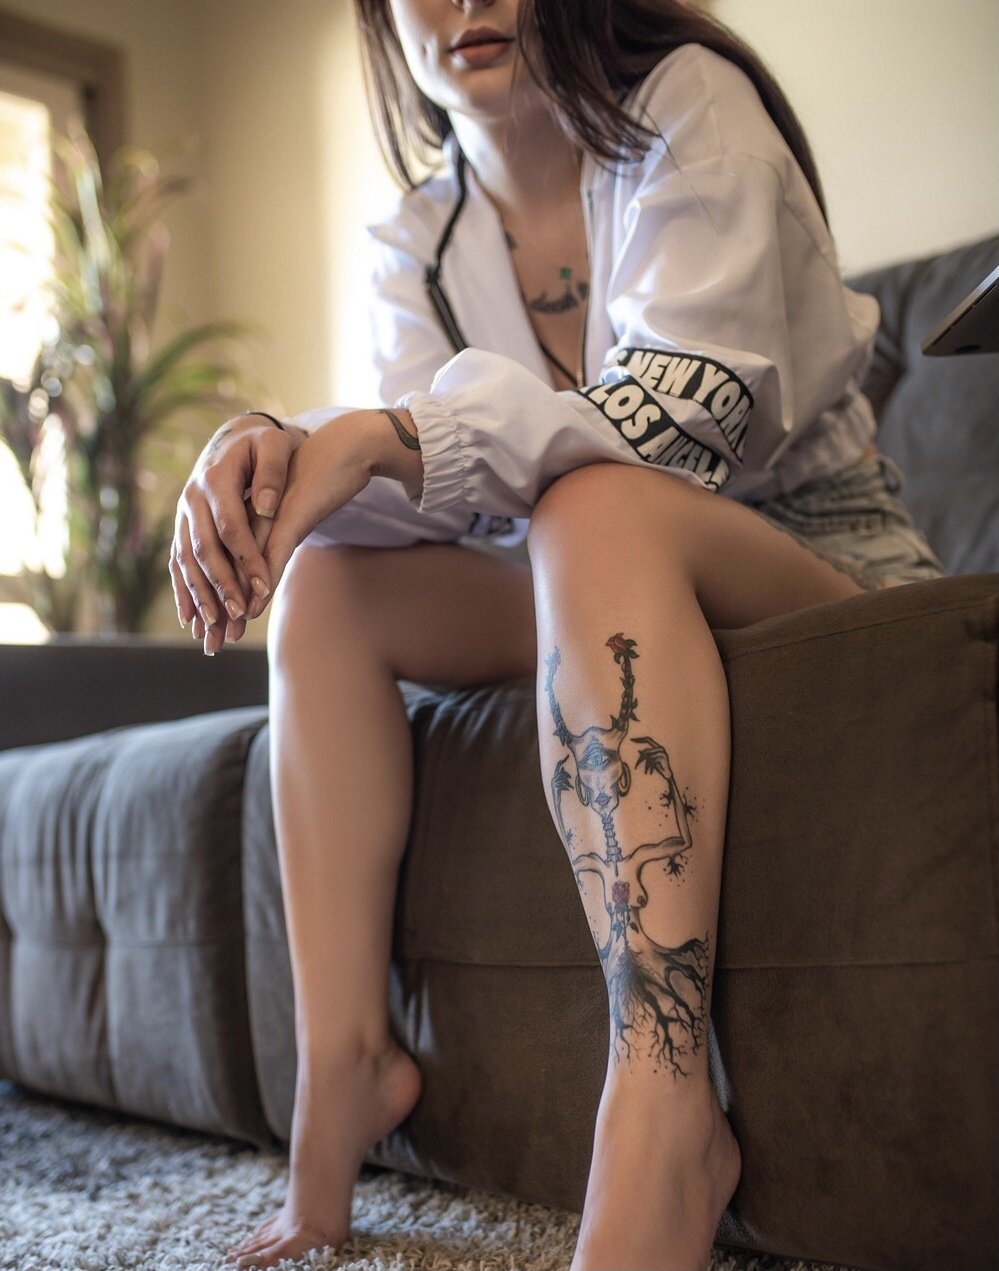 [Suicide Girls] Kah - Joining[30P]